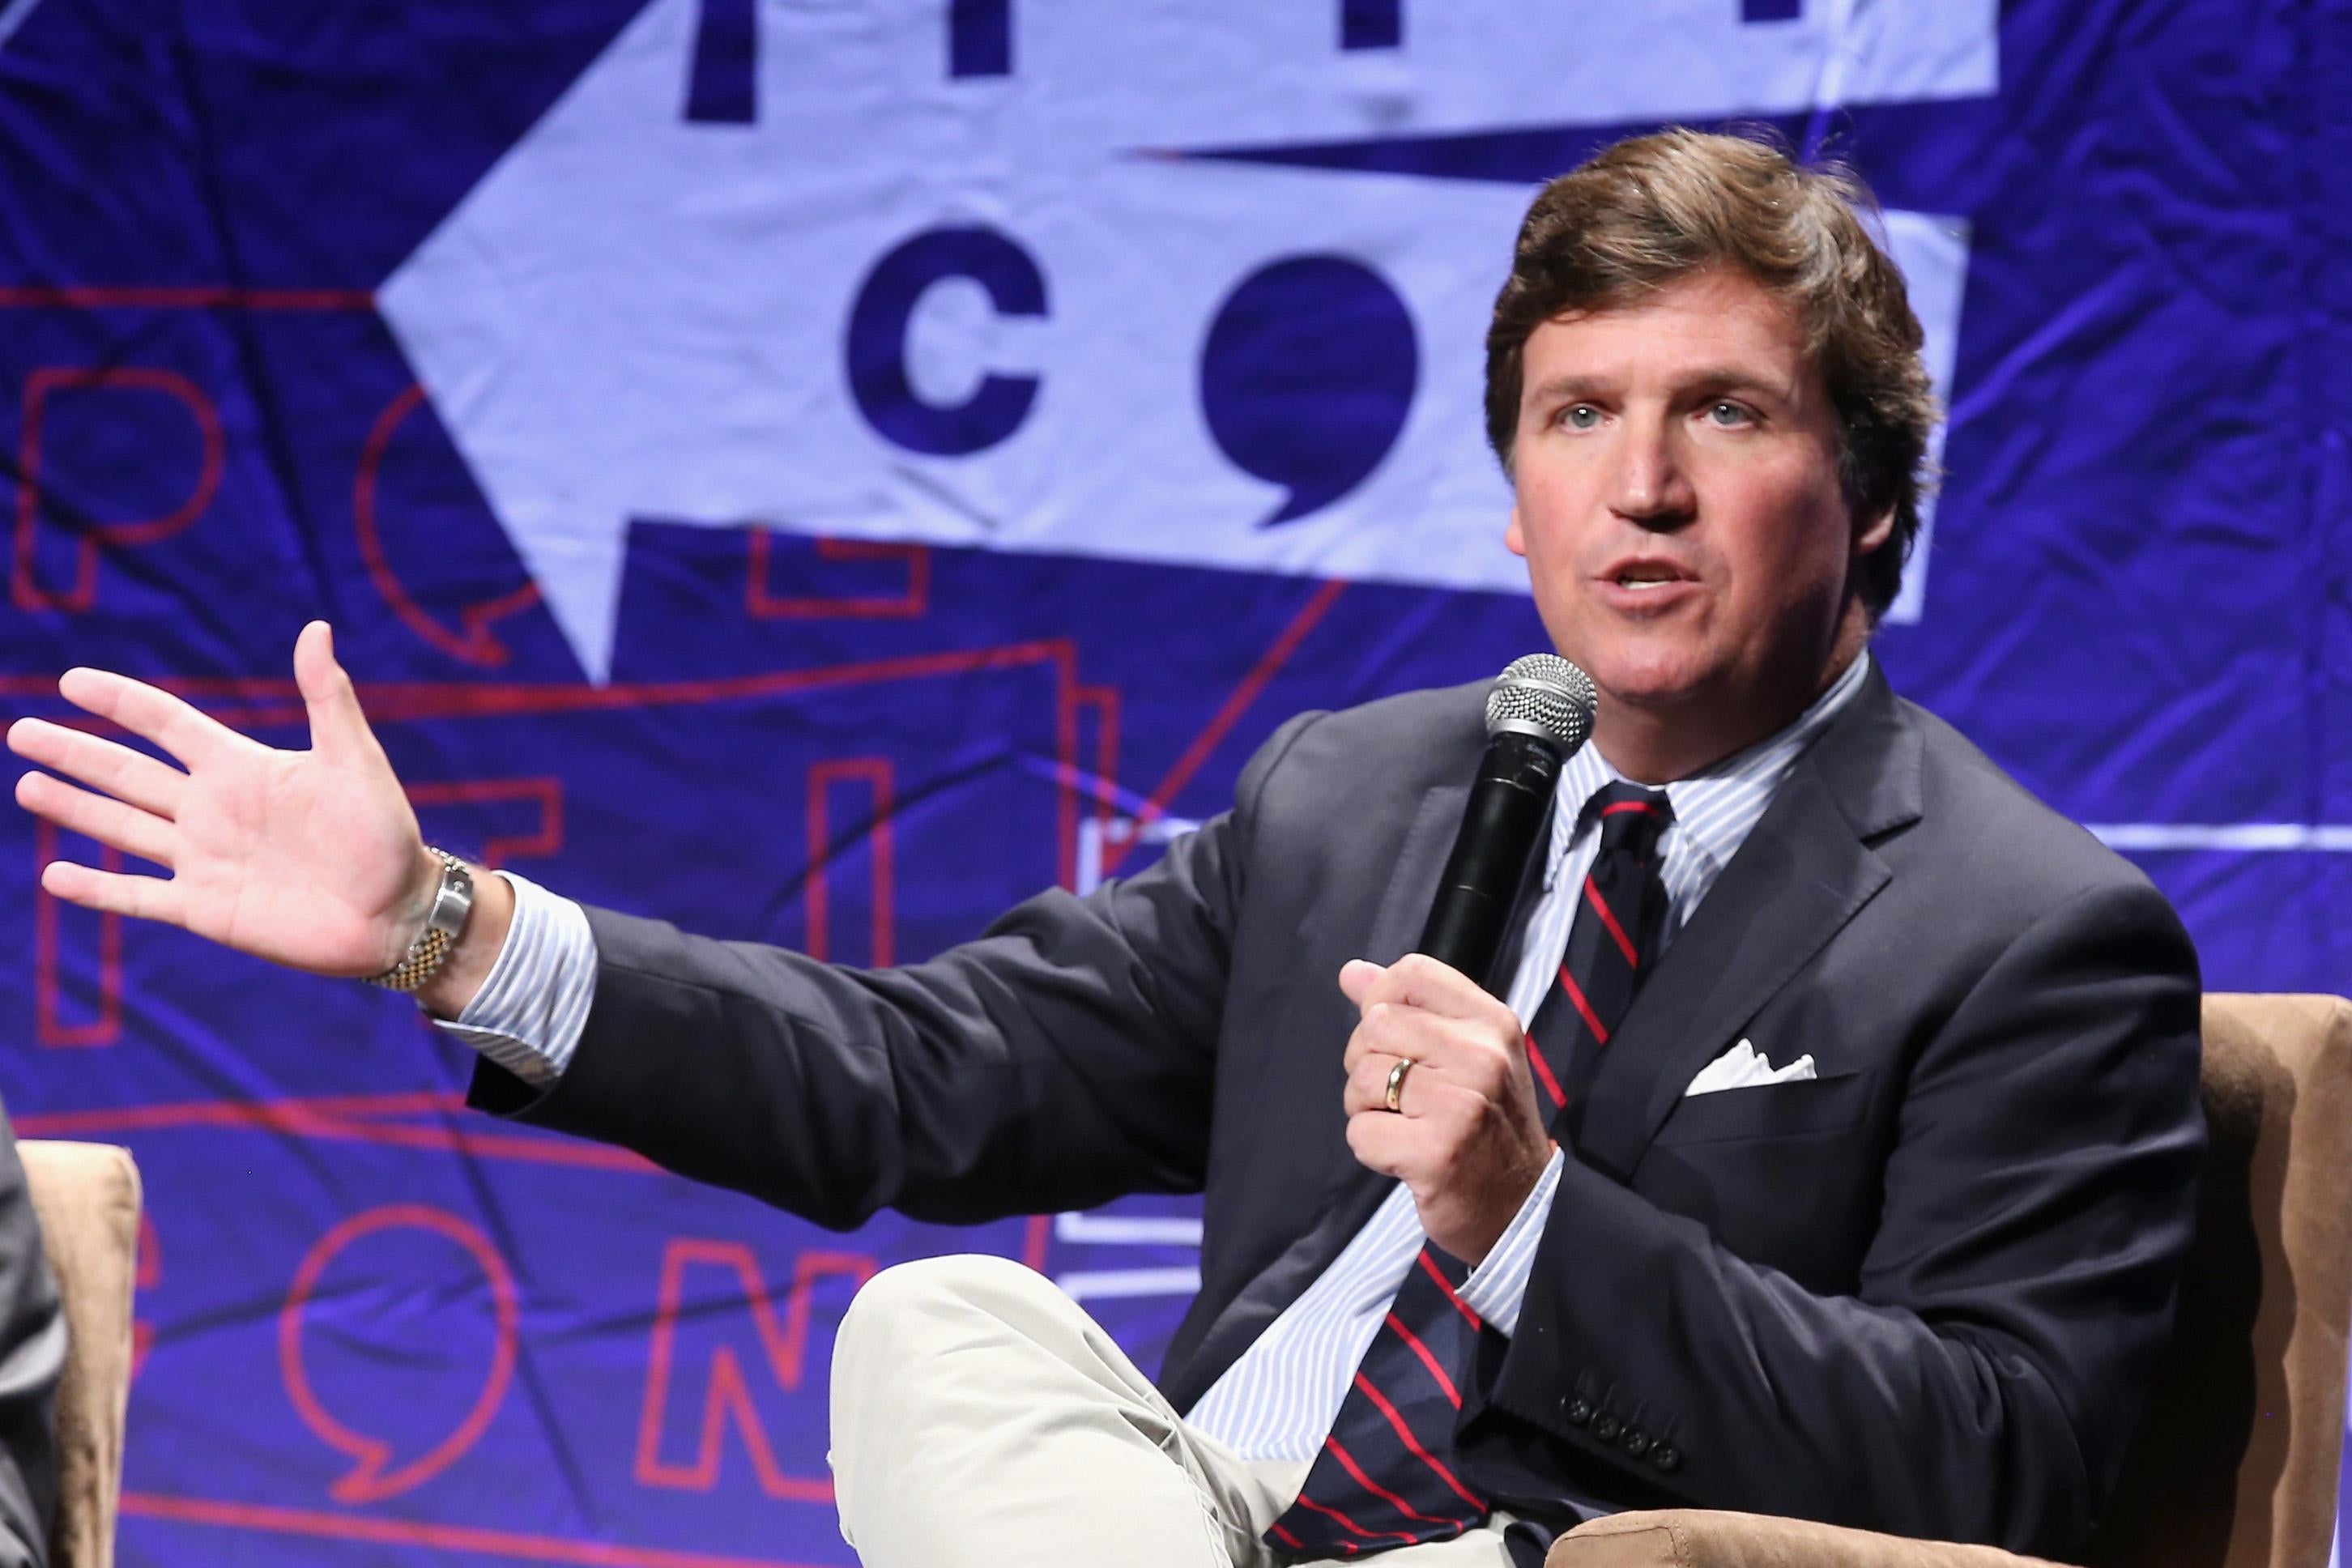 Tucker Carlson speaks into a microphone as he sits on a stage.